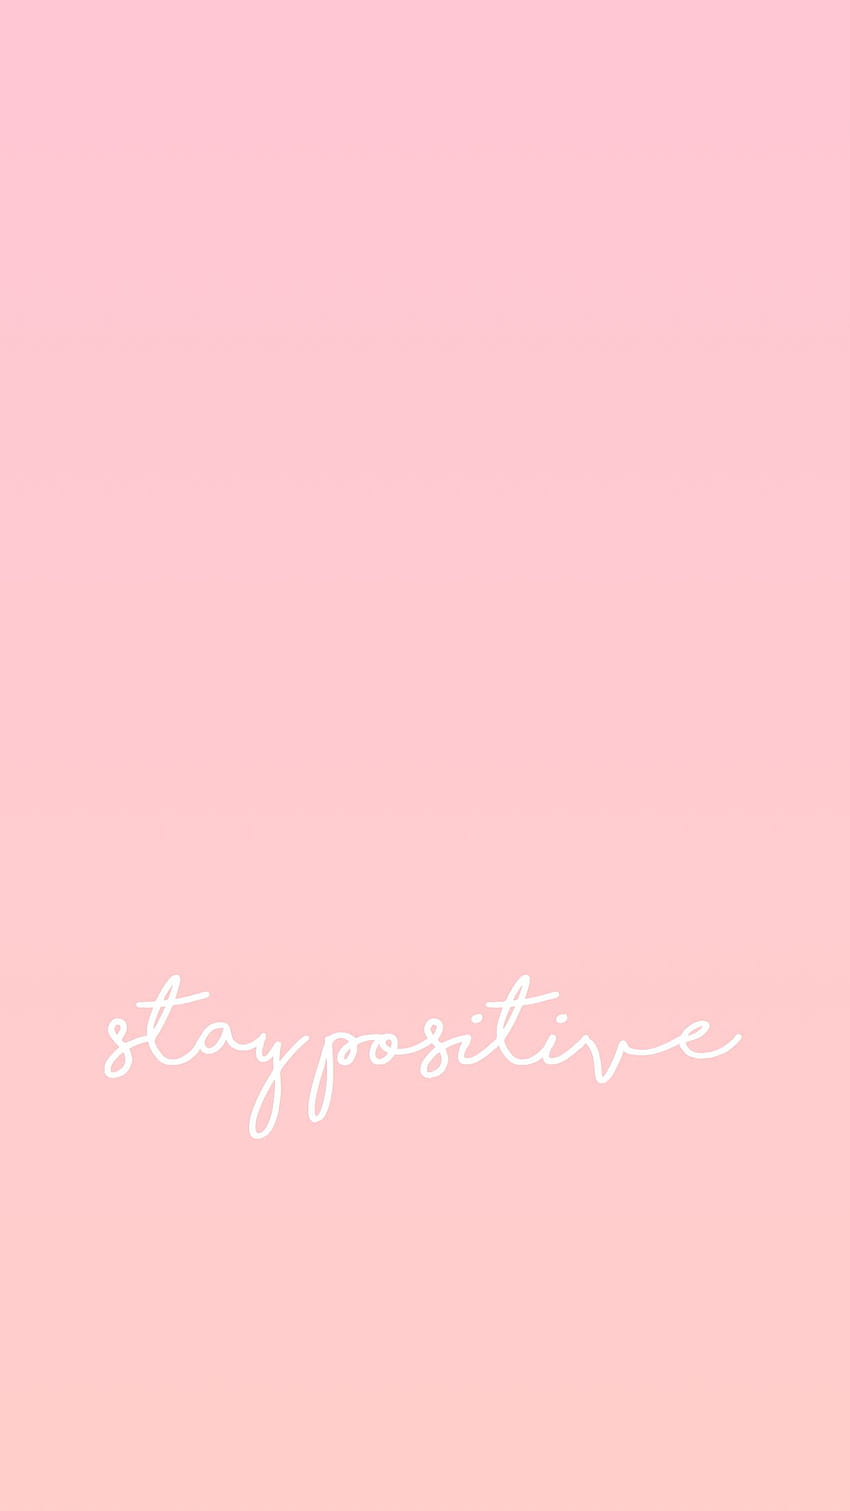 Stay Positive iPhone, stay postive HD phone wallpaper